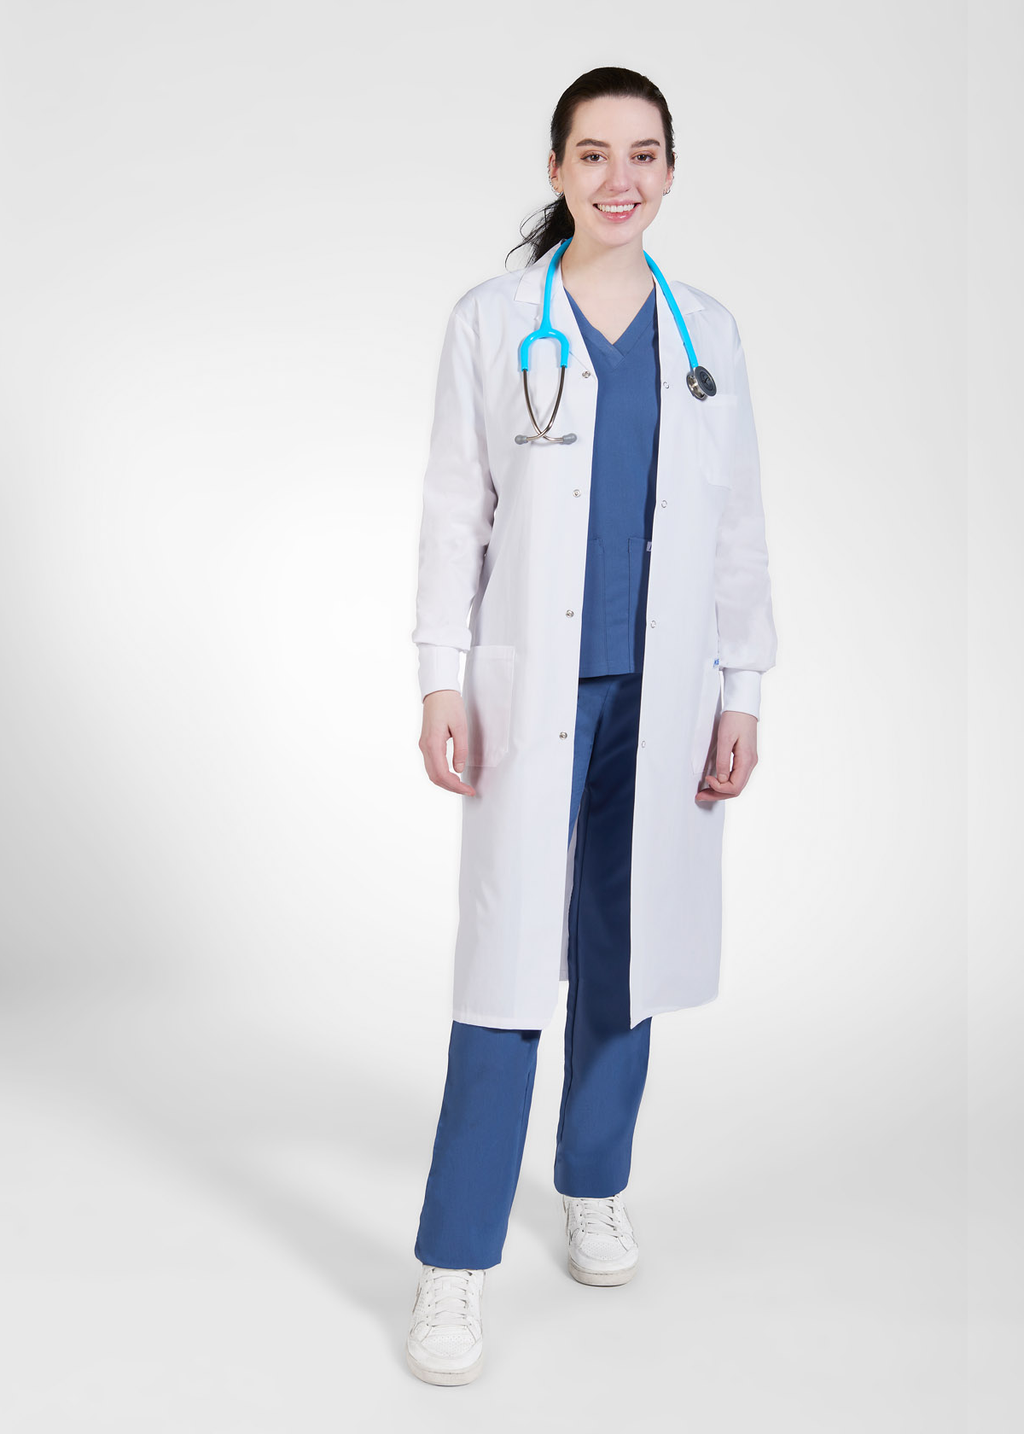 Product - MOBB Full Length Unisex Snap Lab Coat with Knitted Cuffs